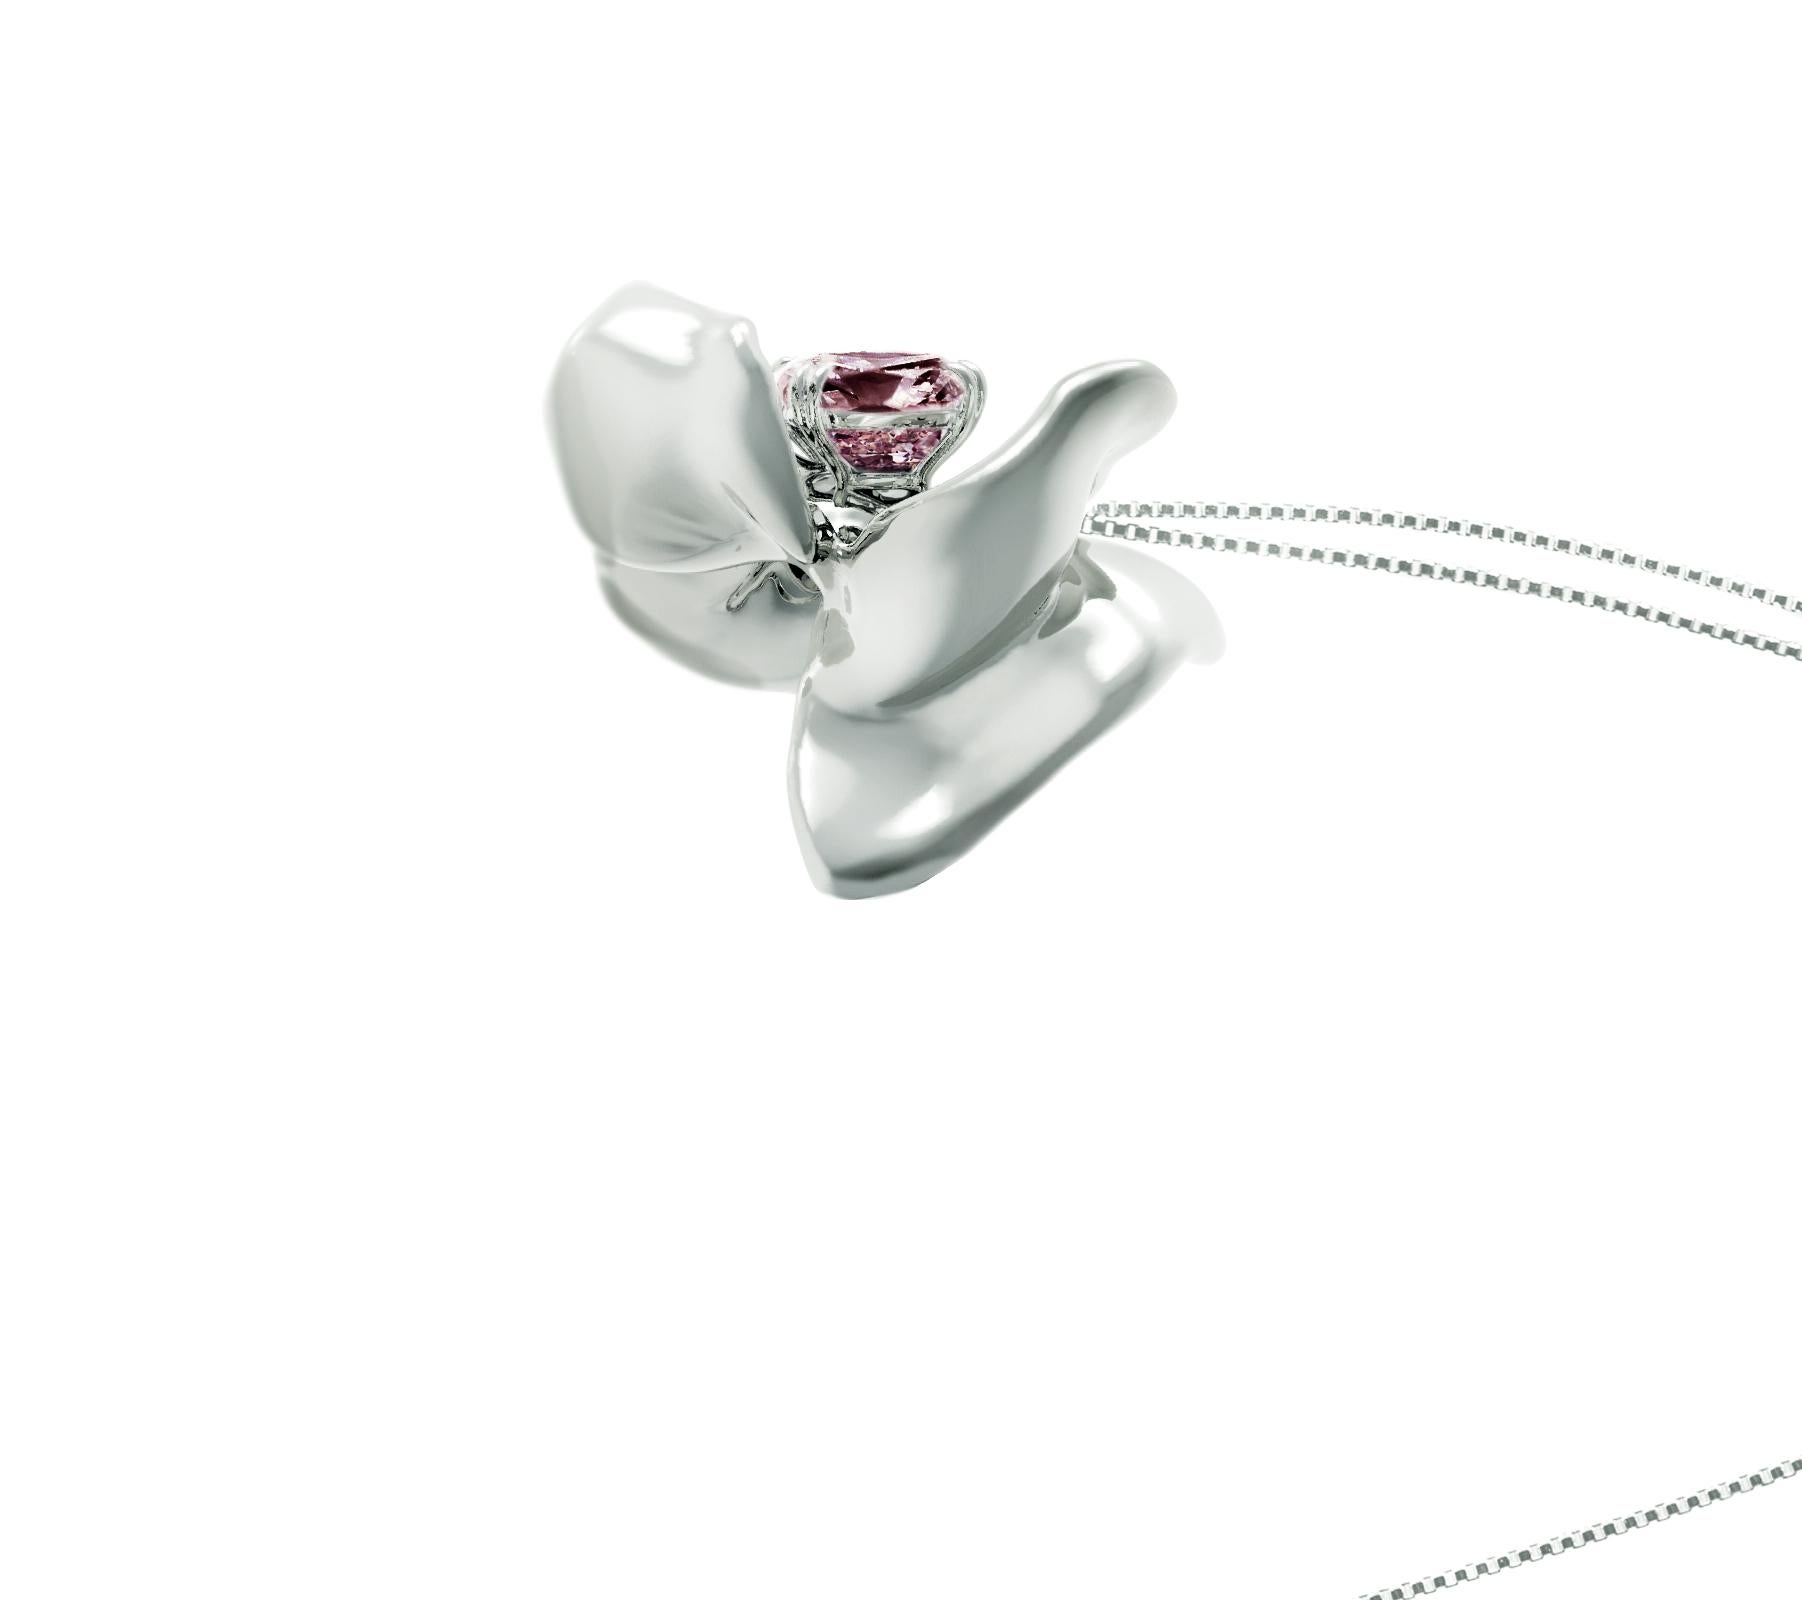 This Magnolia Flower contemporary pendant necklace is crafted in 18 karat white gold, with a storm purple cushion spinel weighing 1.34 carats. The tender water-surface of the spinel multiplies the light, mirroring on the golden petals. The pendant